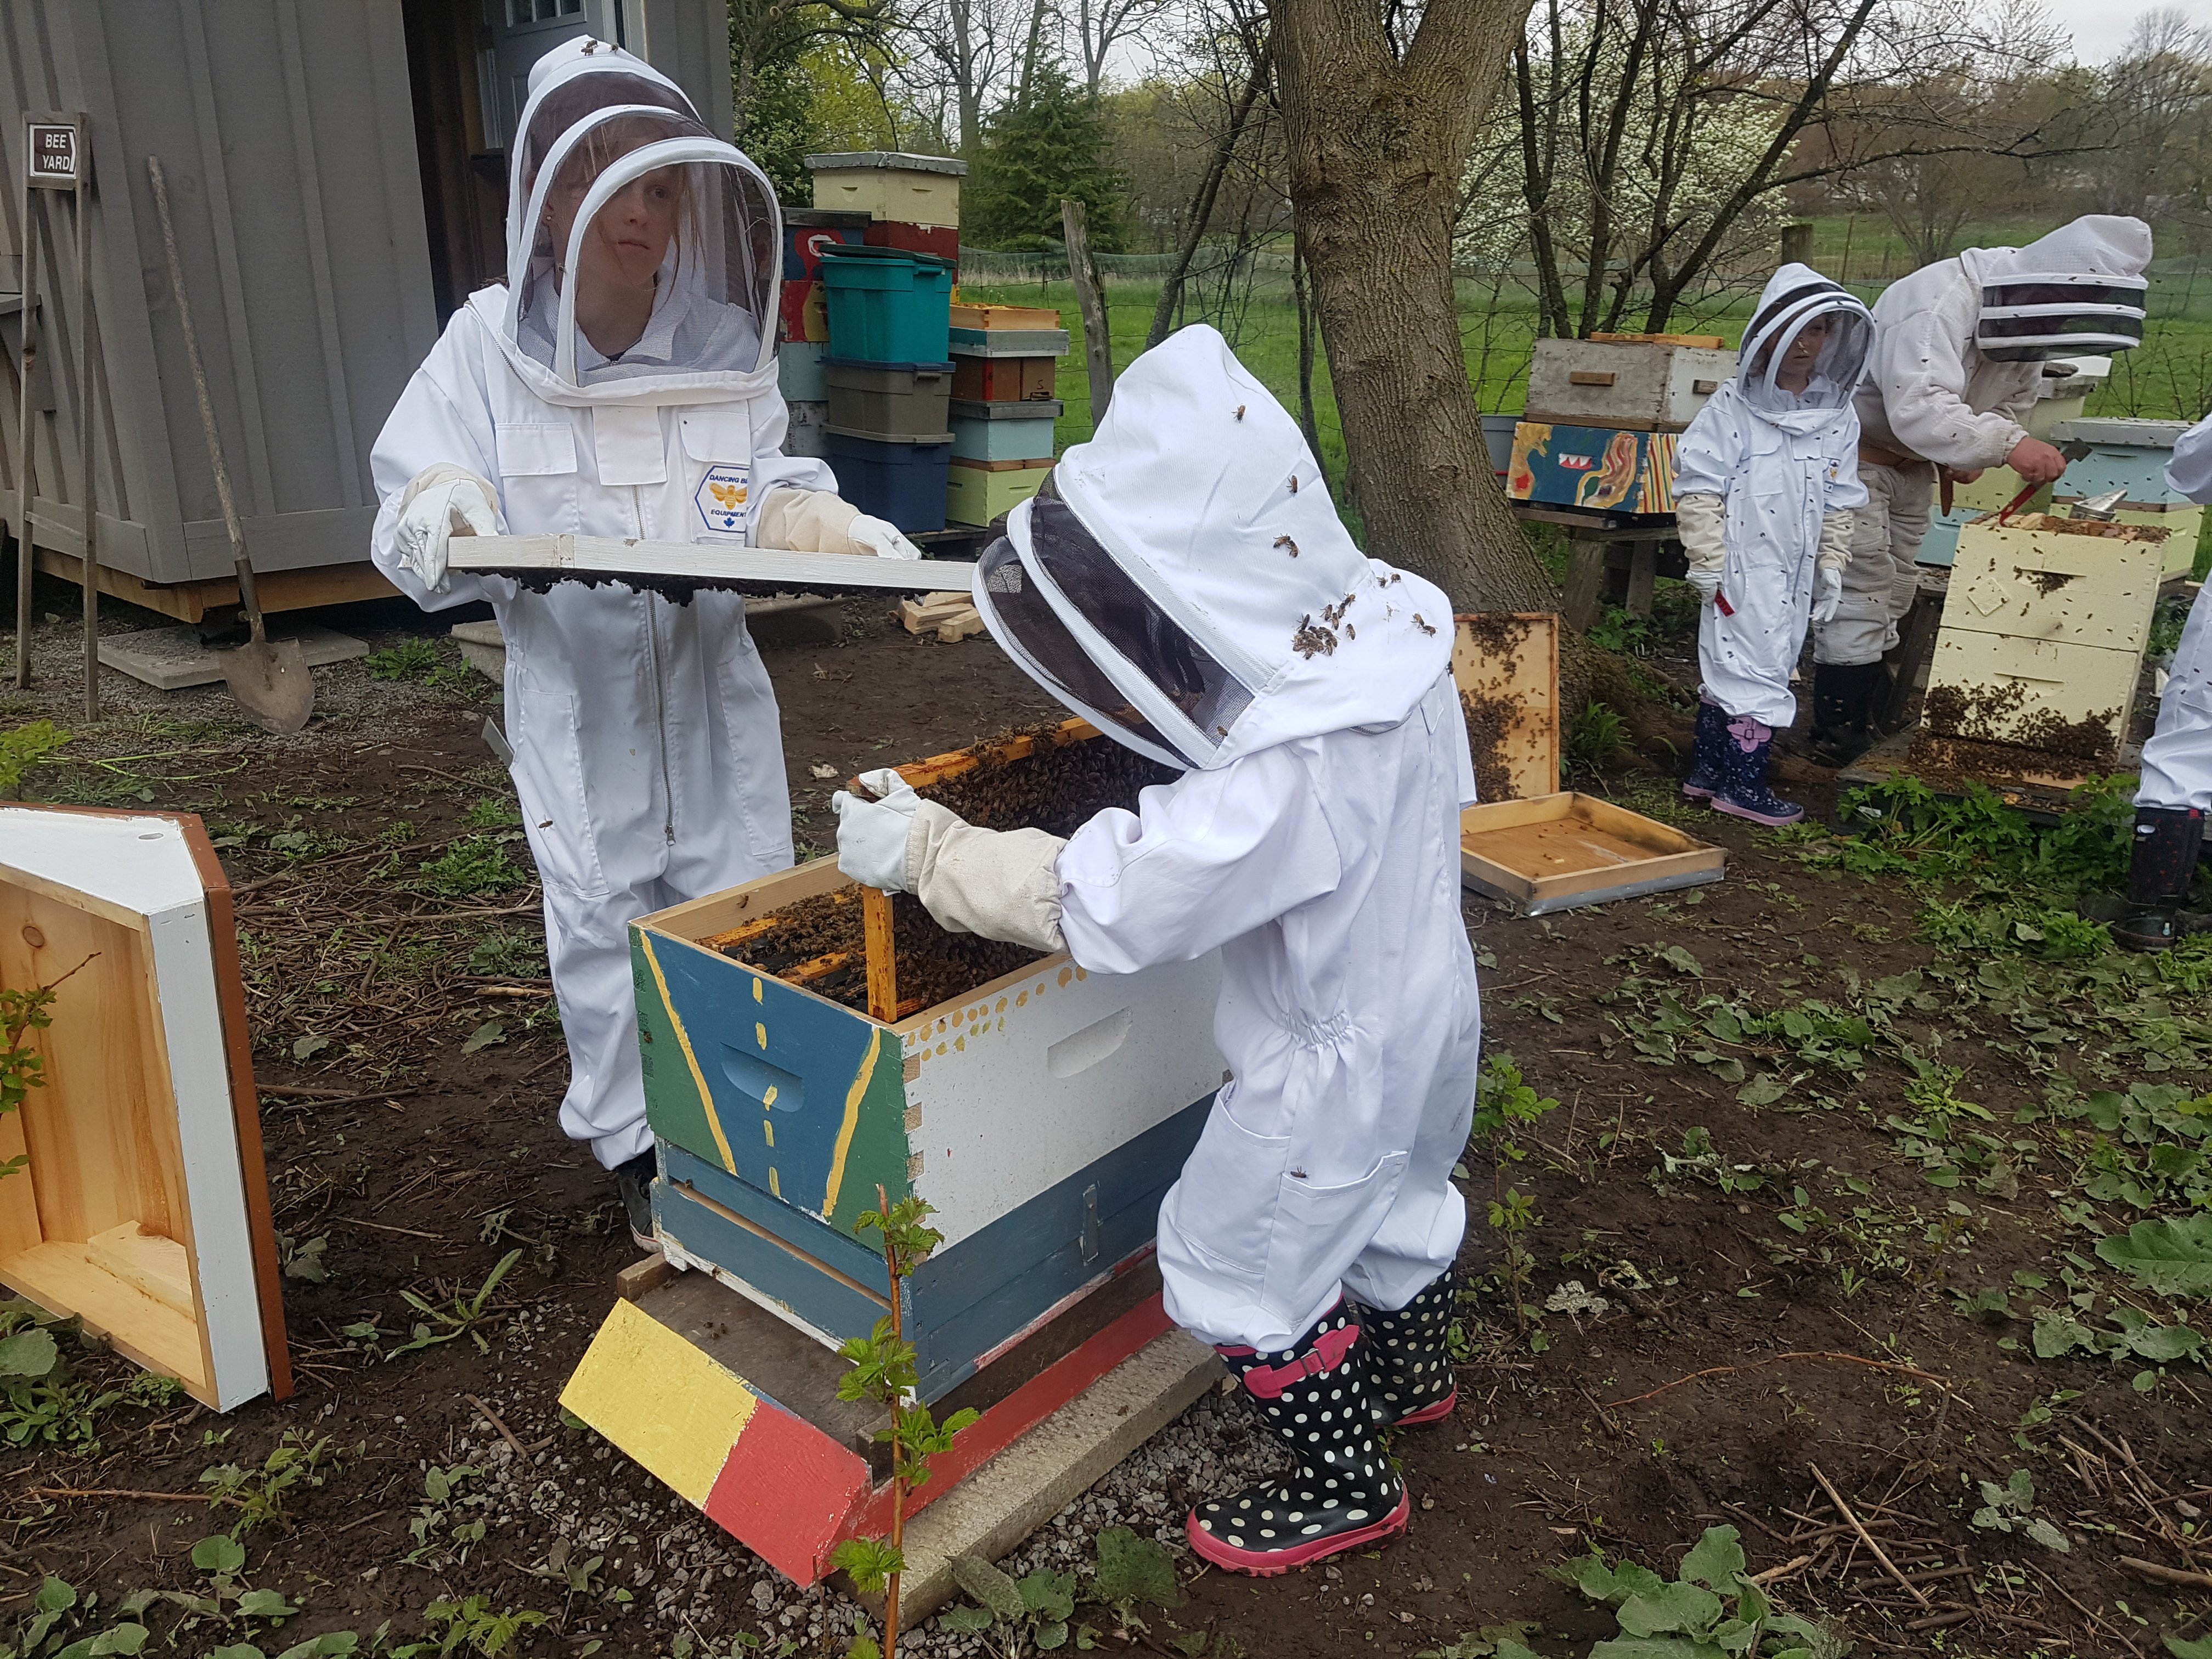 May – The Importance of Bees and Splitting a Hive